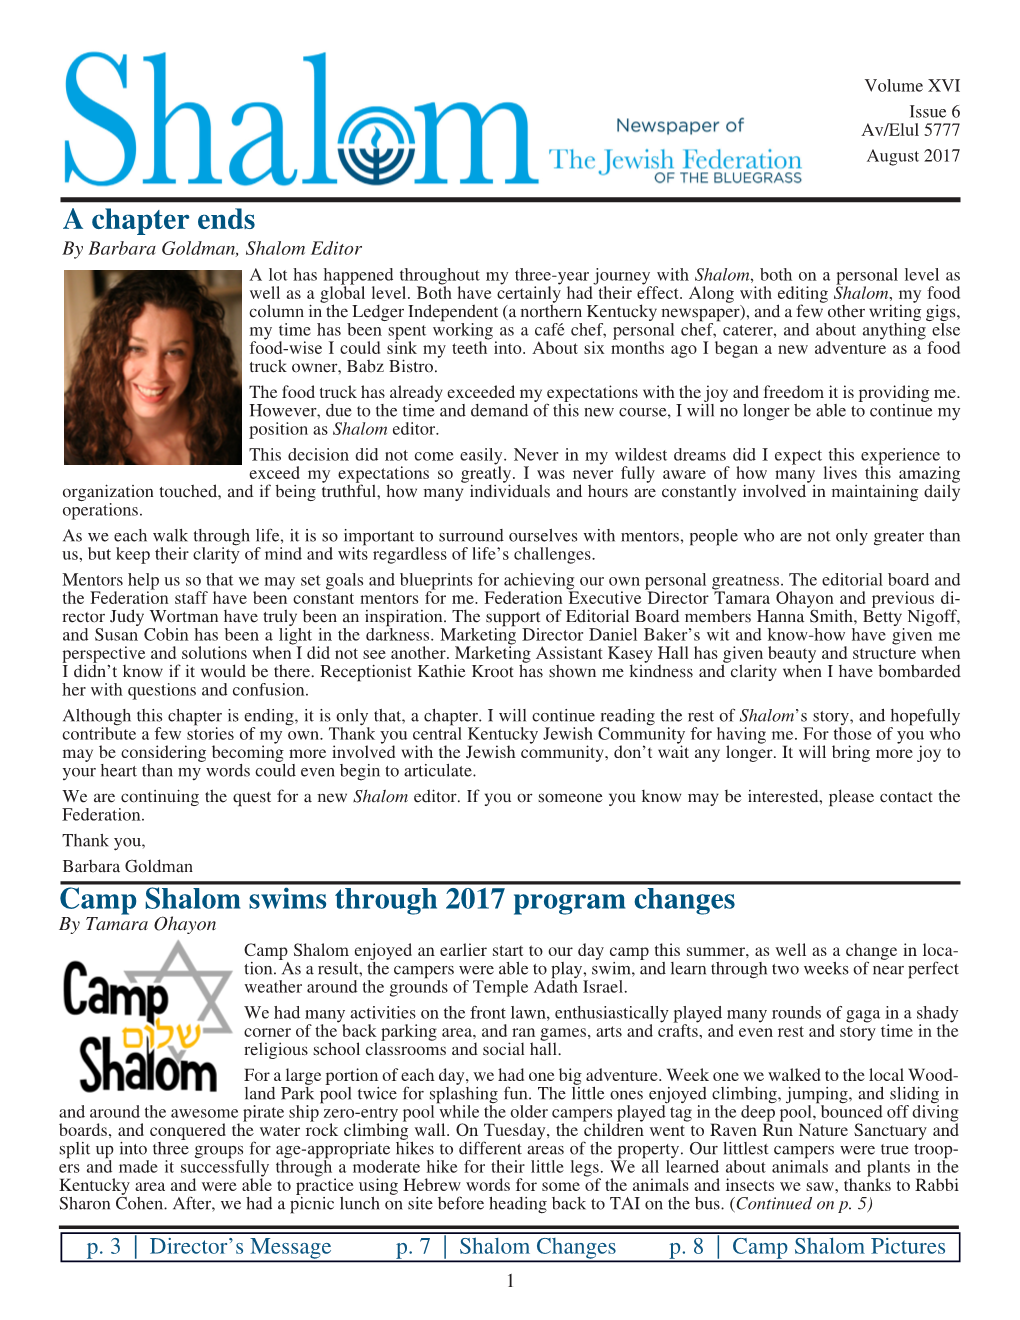 A Chapter Ends Camp Shalom Swims Through 2017 Program Changes